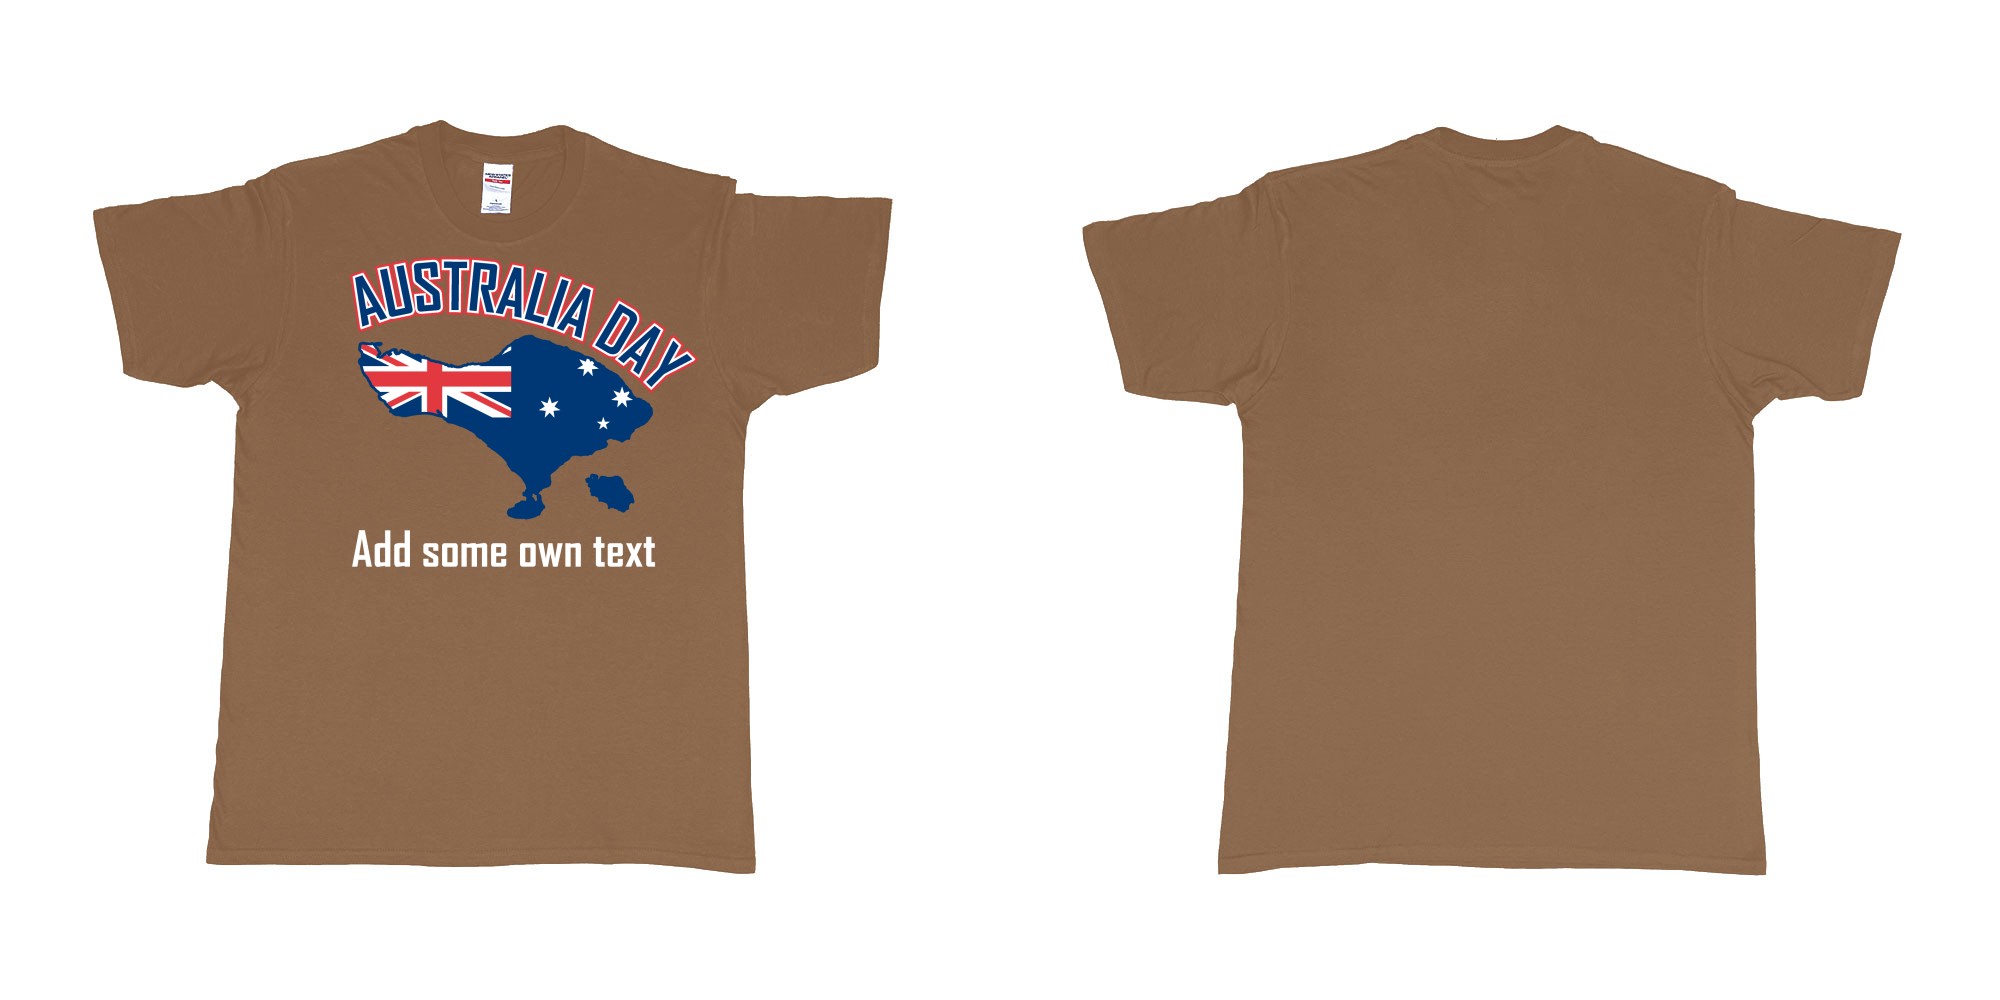 Custom tshirt design australia day in bali custom teeshirt printing in fabric color chestnut choice your own text made in Bali by The Pirate Way